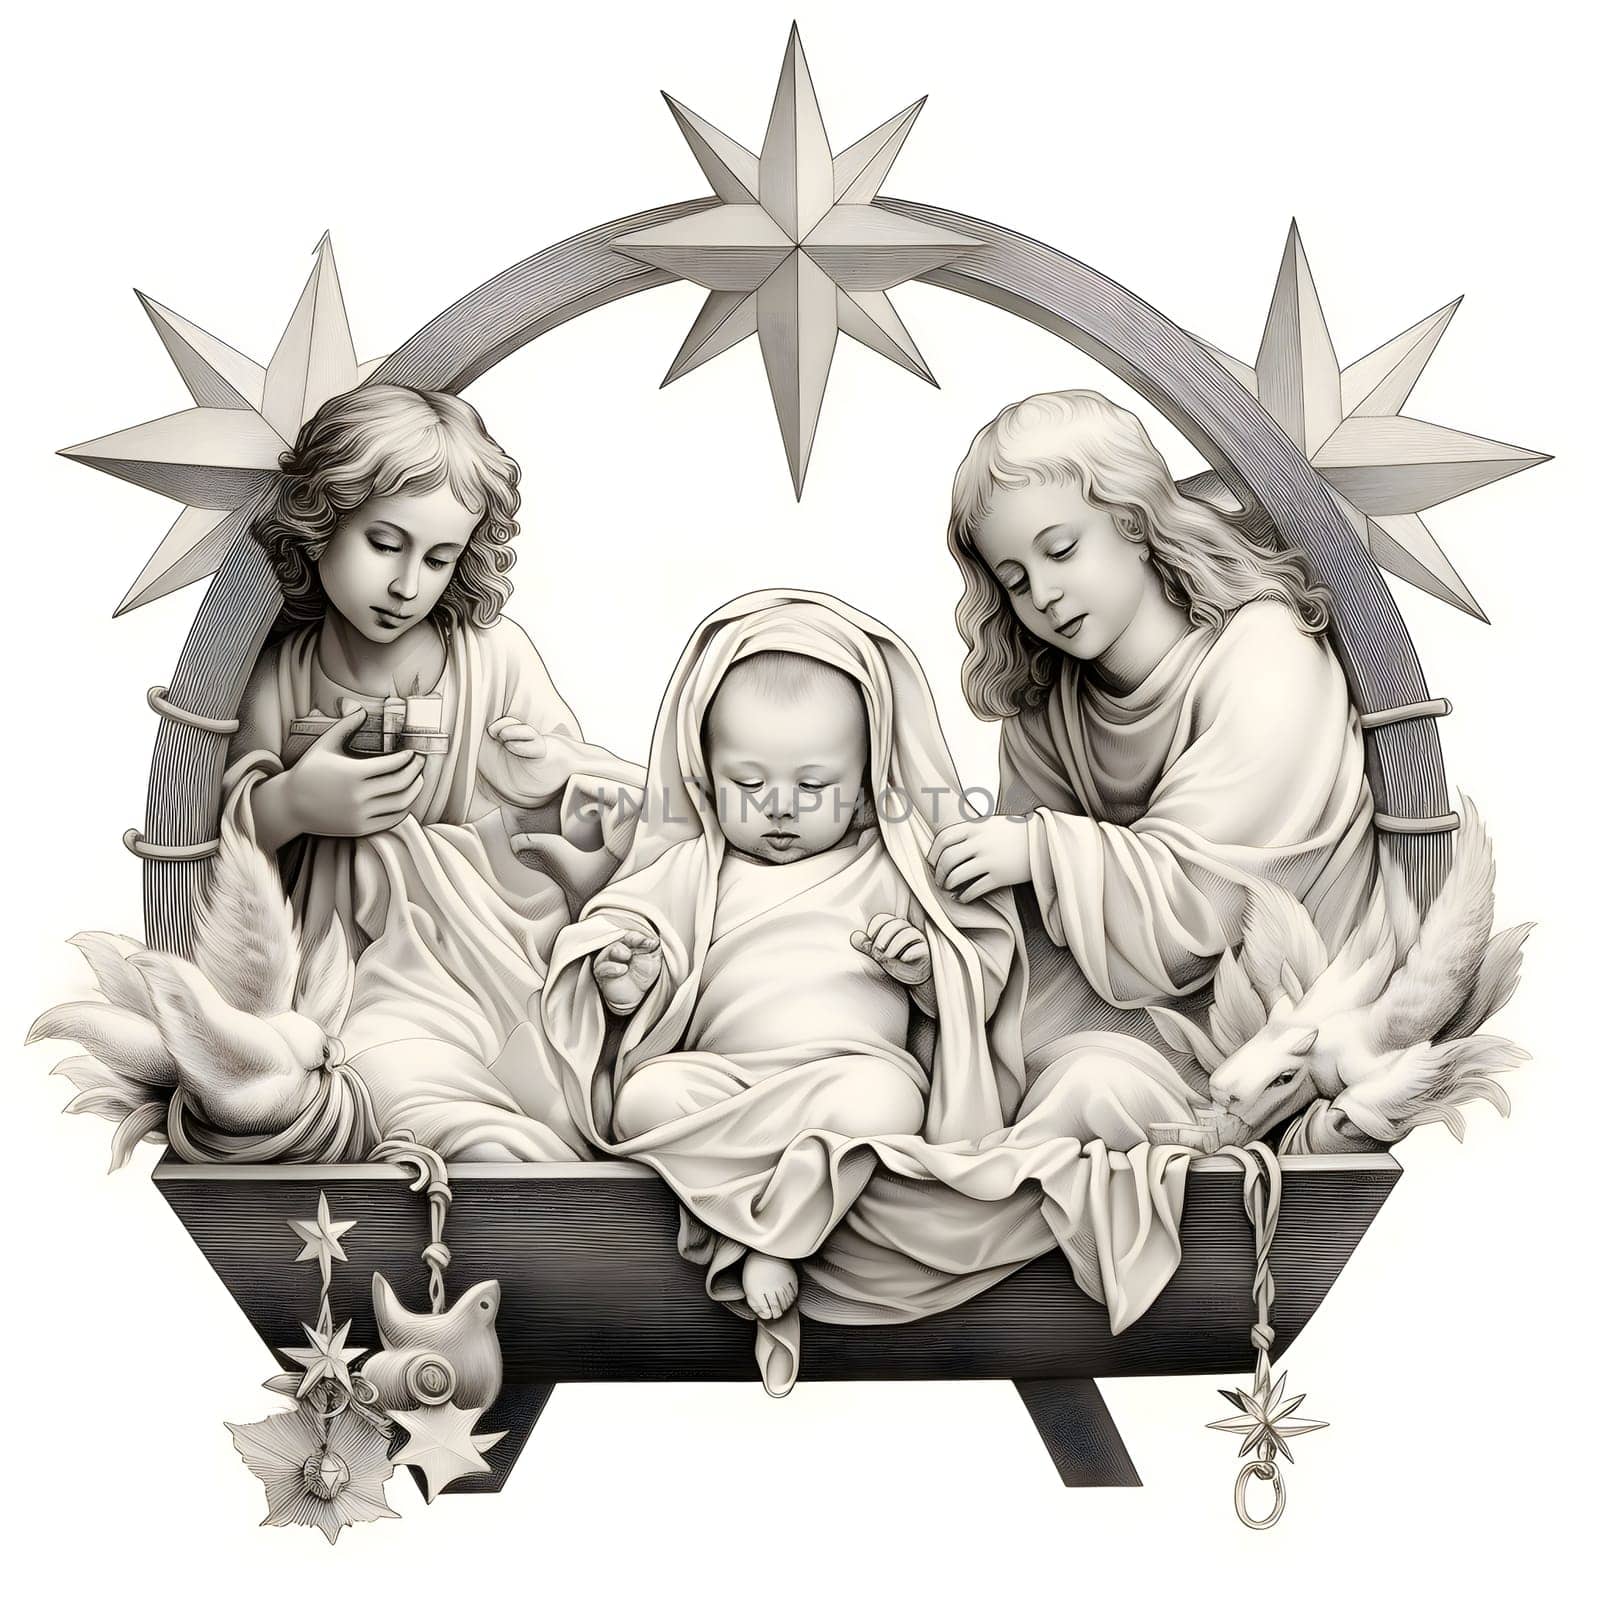 Black and White coloring sheet of a manger, a born baby and two angels. The Christmas star as a symbol of the birth of the savior. by ThemesS